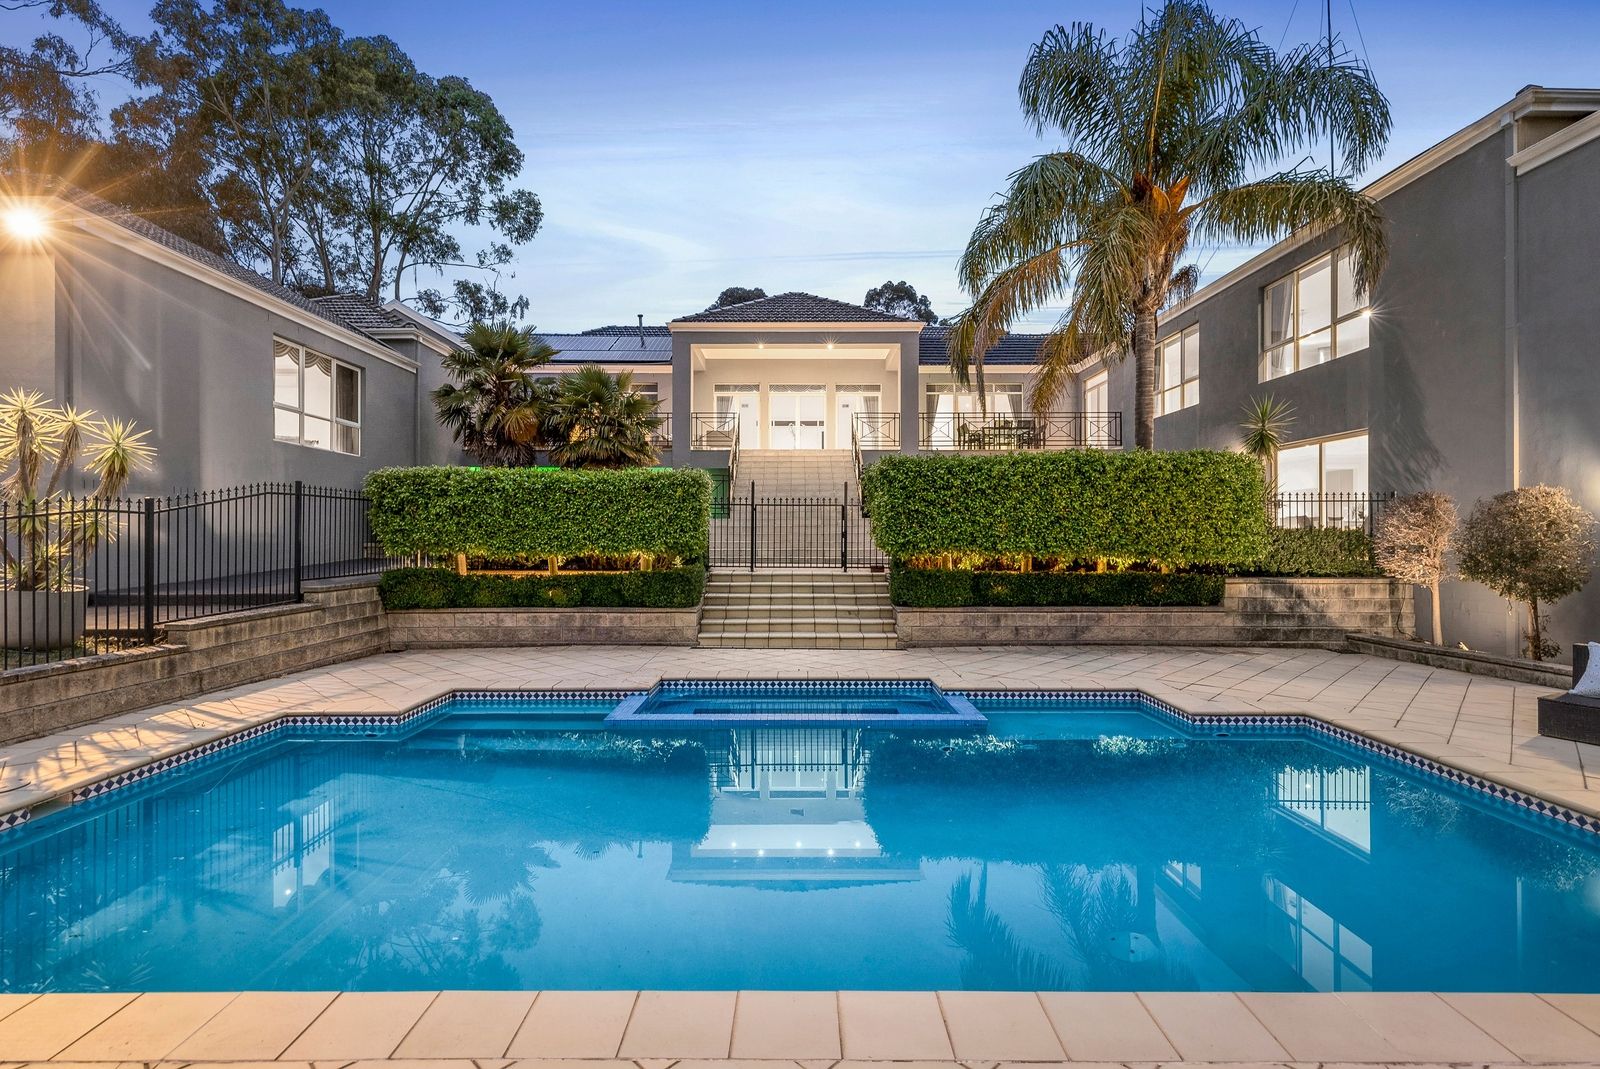 15-17 Flannery Court, Warrandyte VIC 3113, Image 0